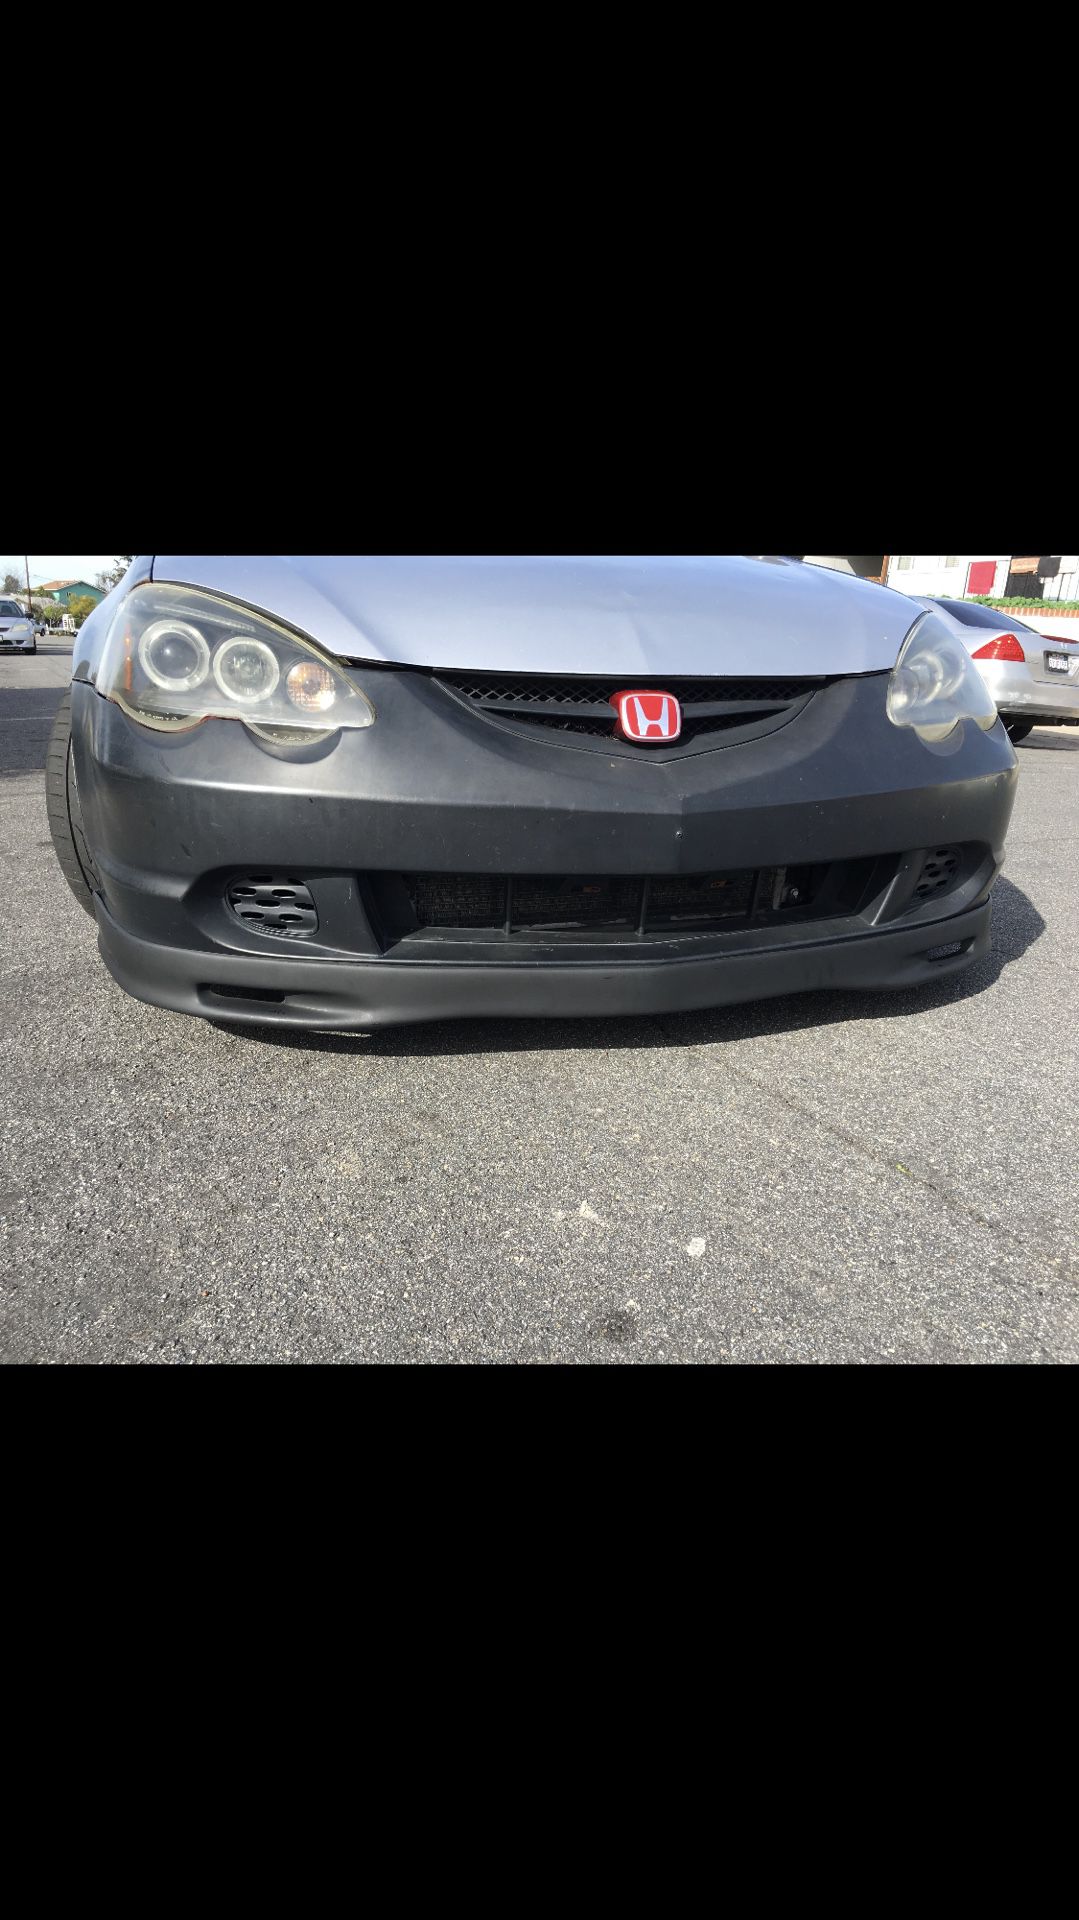 02/04 New Acura RSX spoon front lip